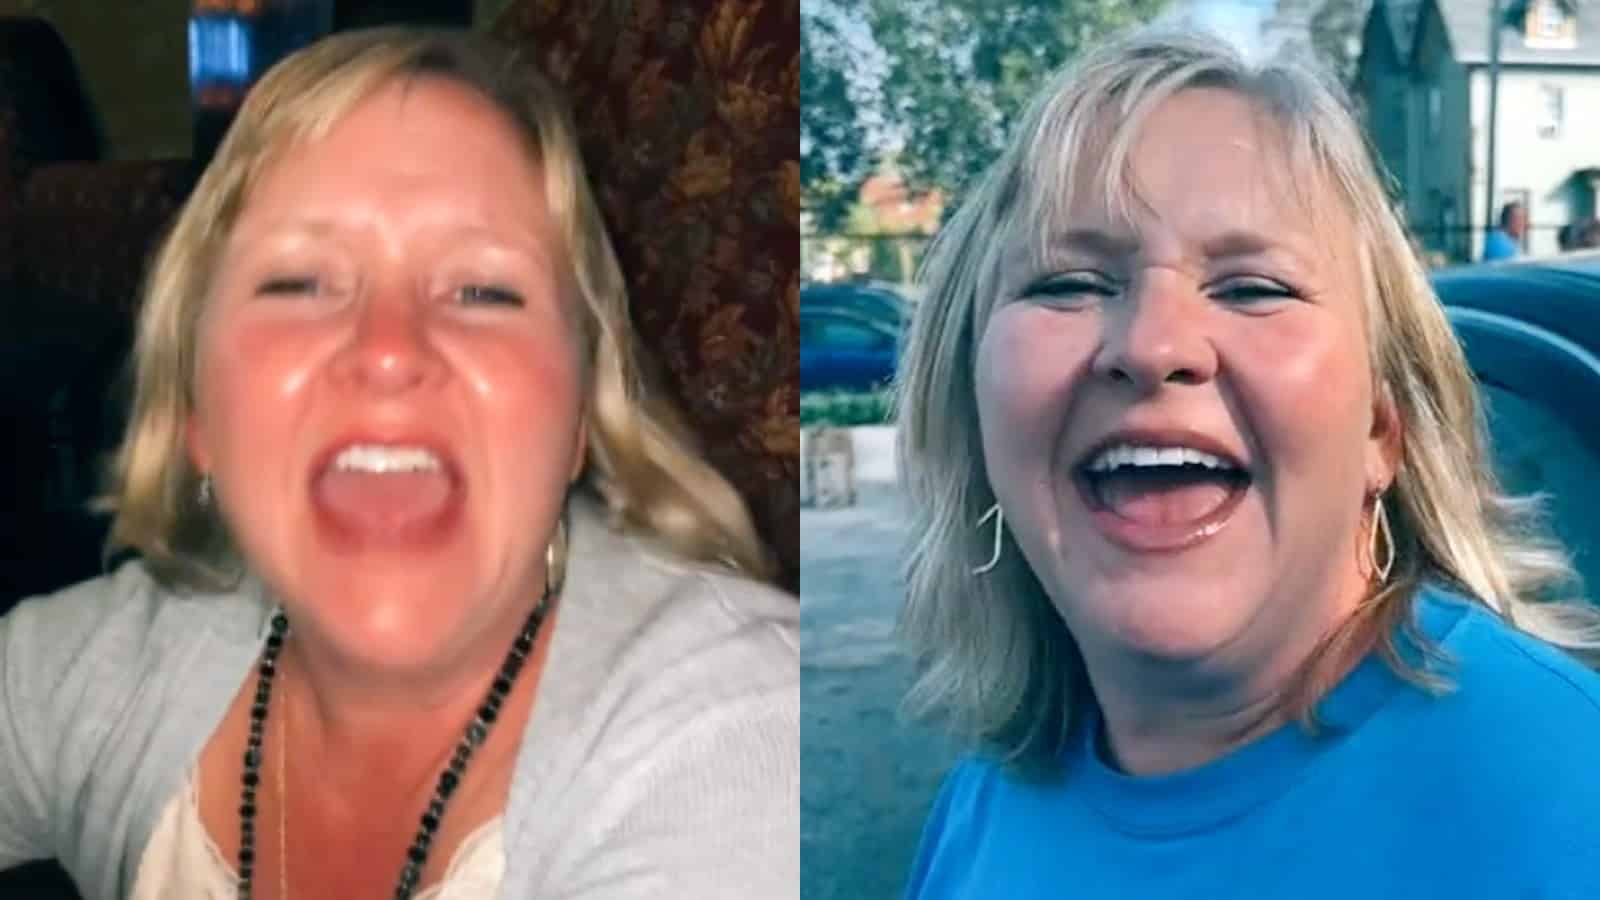 Pictures of one of the viral lip syncing TikTok moms one year apart